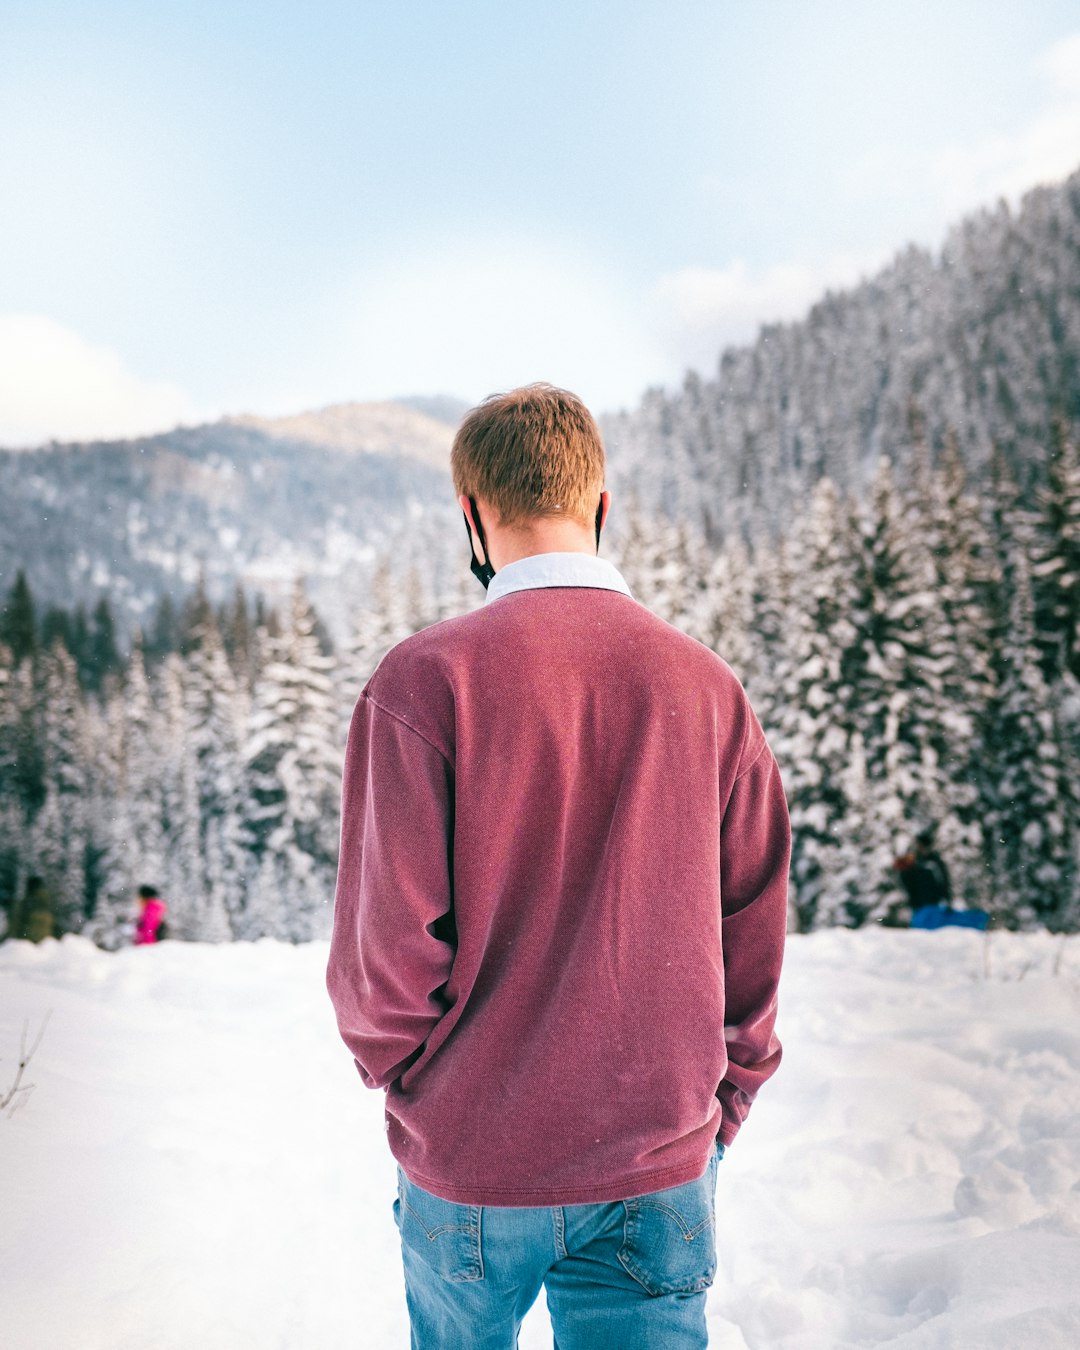 man in red sweater standing on snow covered ground during daytime